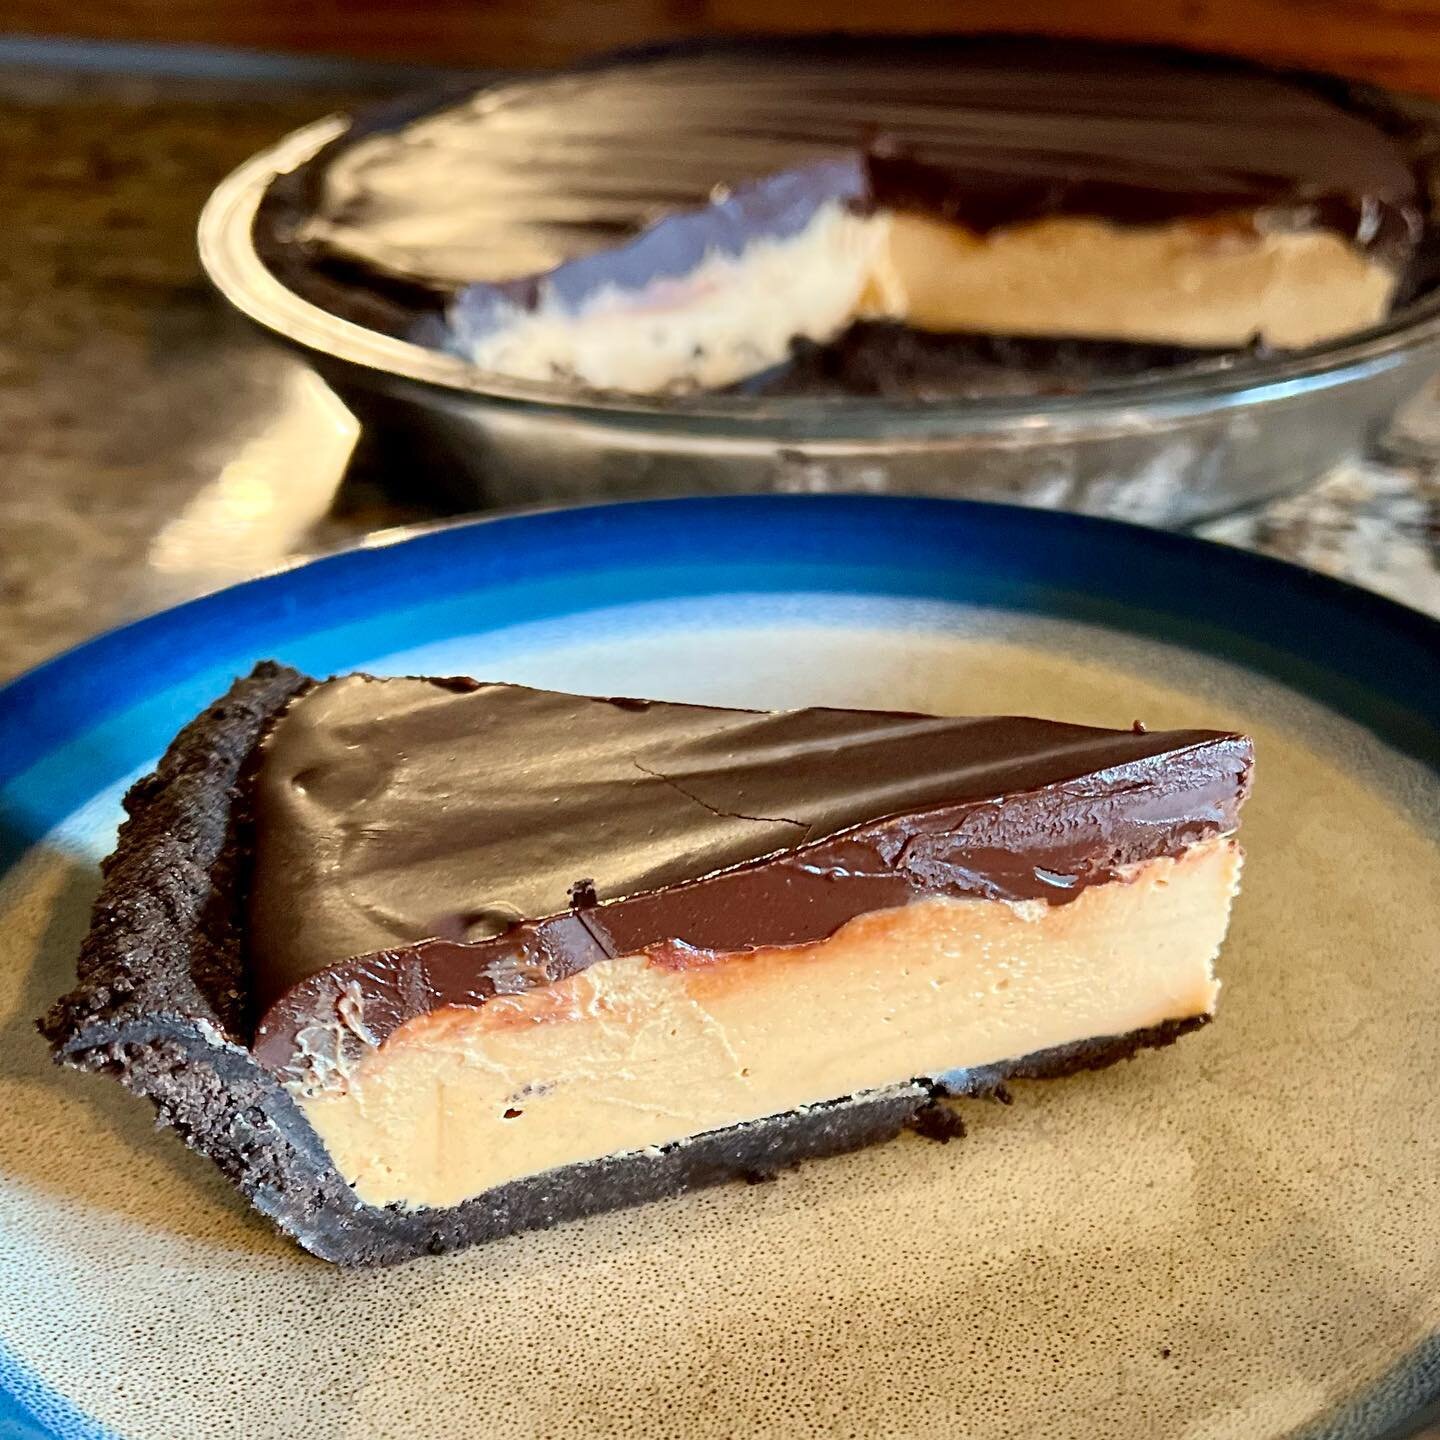 Pi Day is an official family holiday at our house. This year we celebrated with chocolate peanut butter pie!
🥧 
#ChocolatePeanutButterPie #chocolatepeanutbutter #PiDay #PiDay2023 #NationalPiDay #EatMorePie #SliceOfPie #NationalPieDay #DeliciousPie #